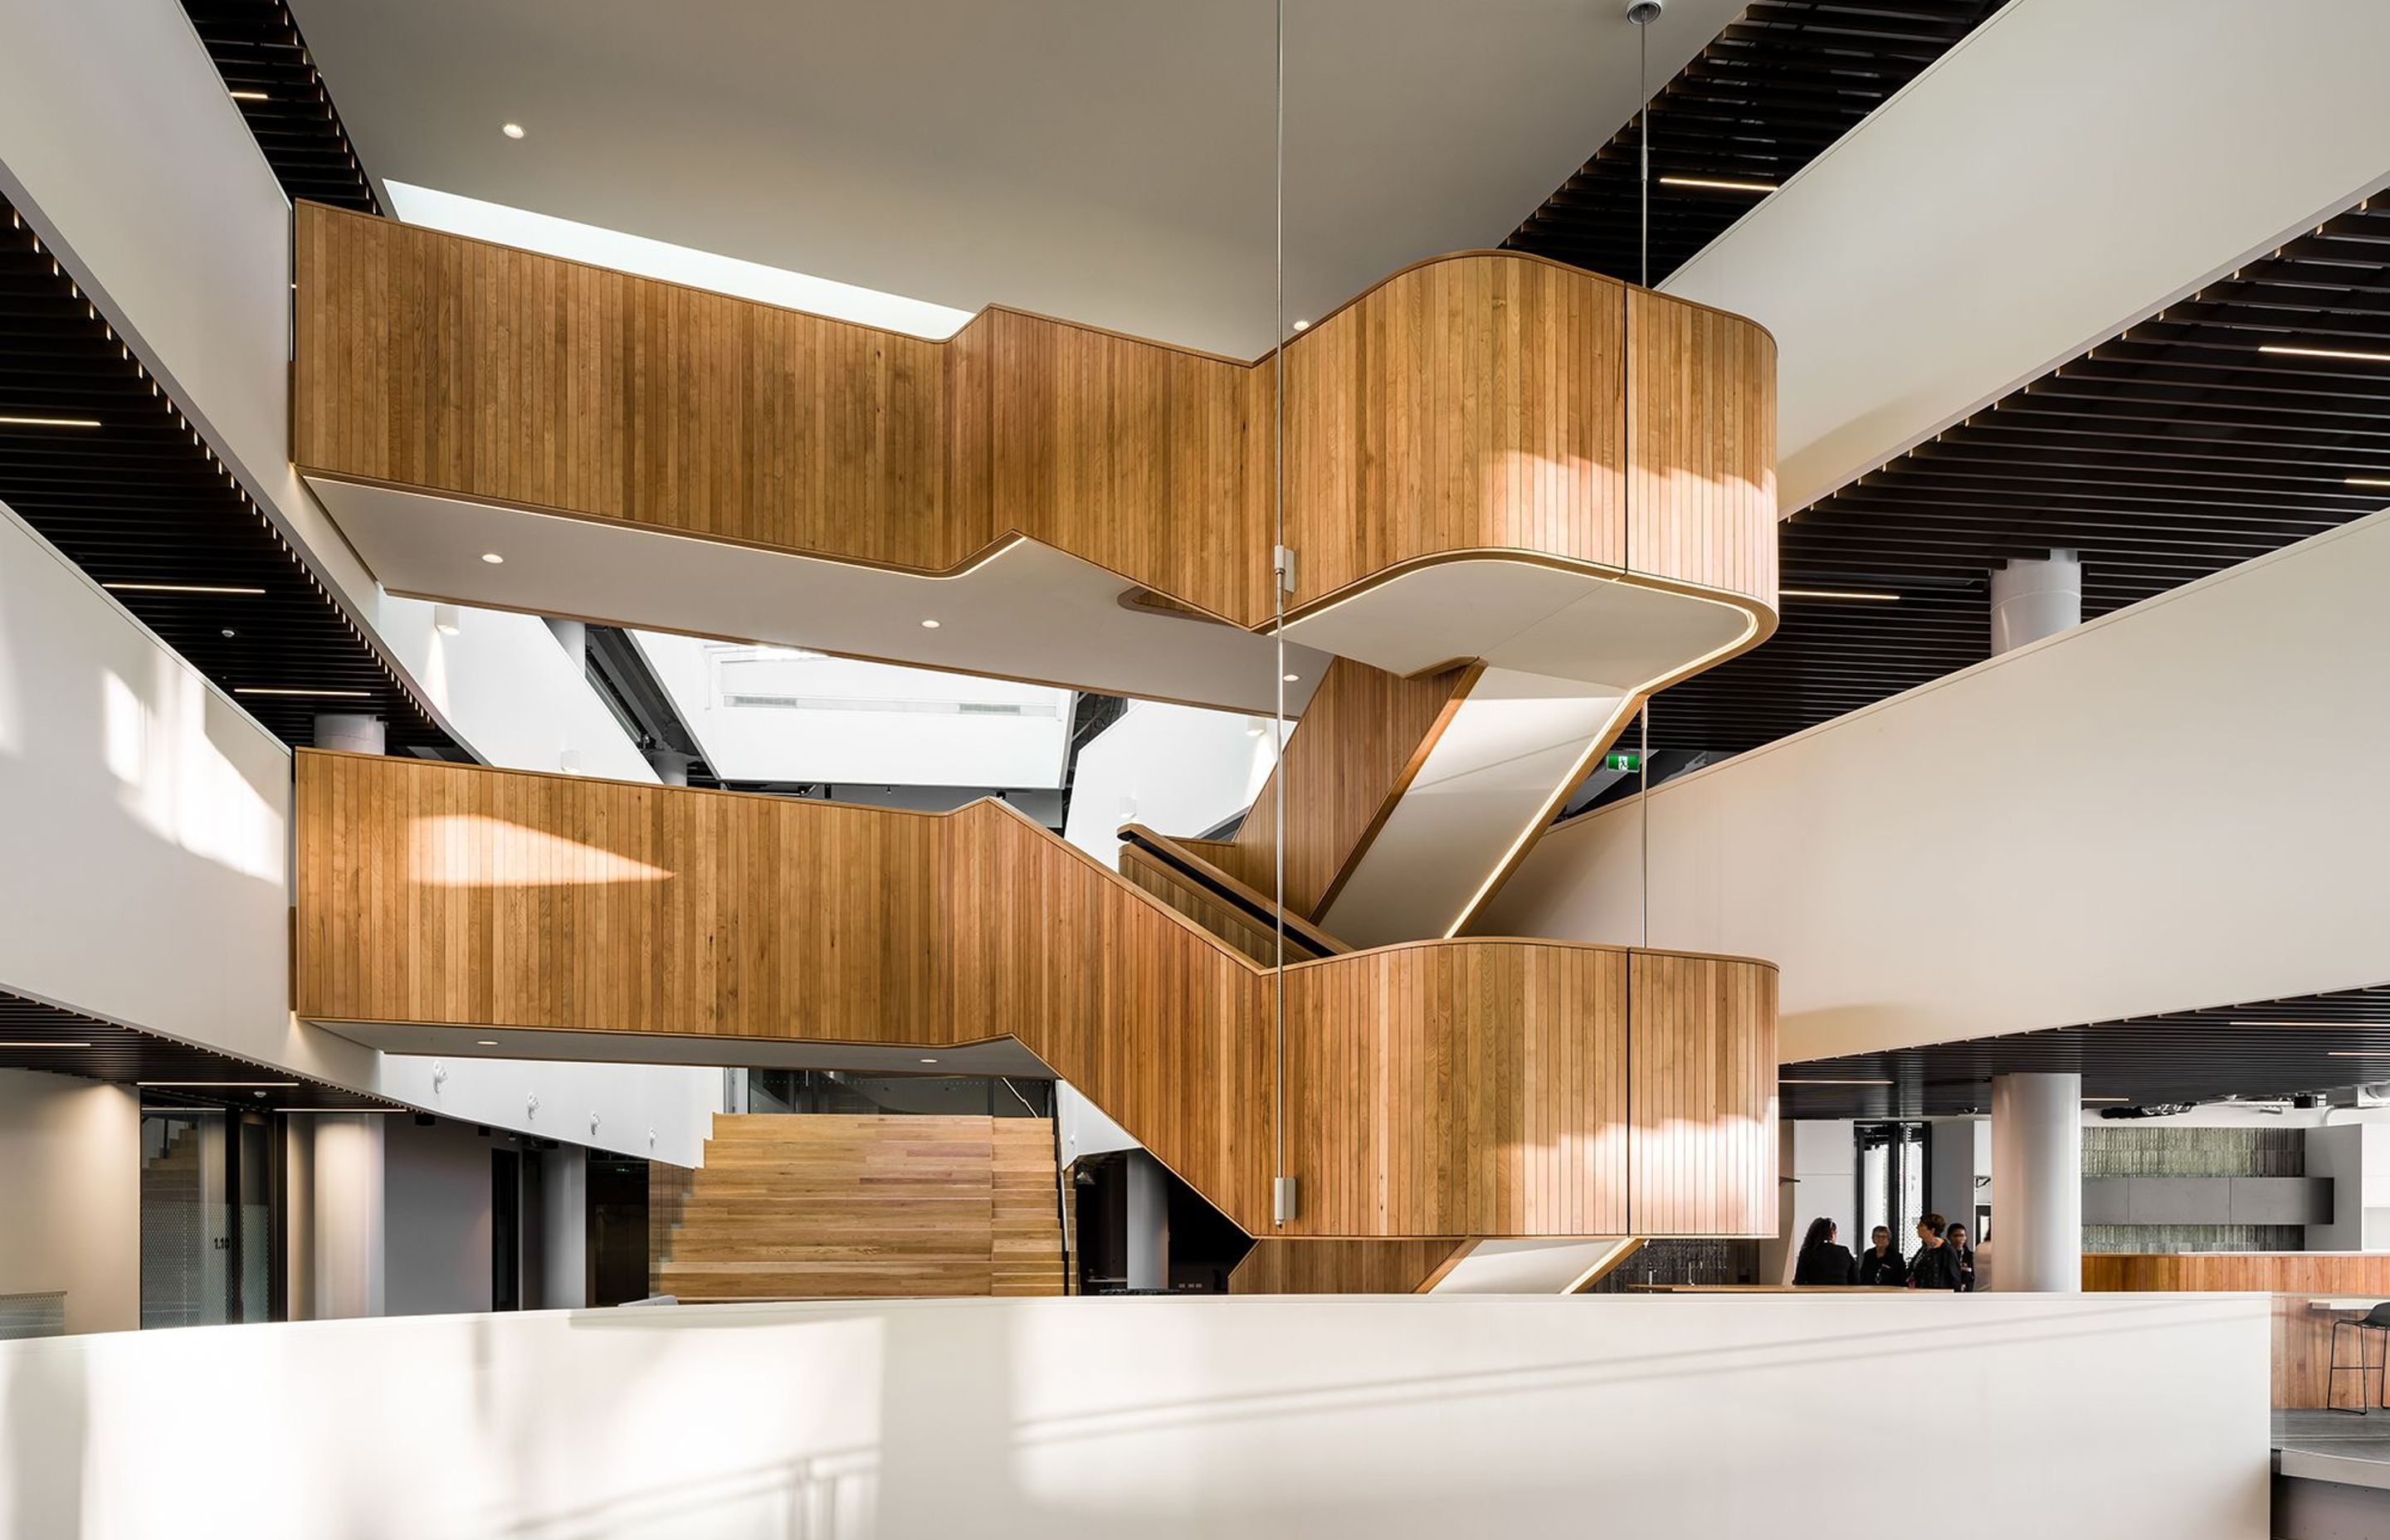 Timber panelling in the interior adds warmth and texture, including a hanging timber staircase inserted into the central void.